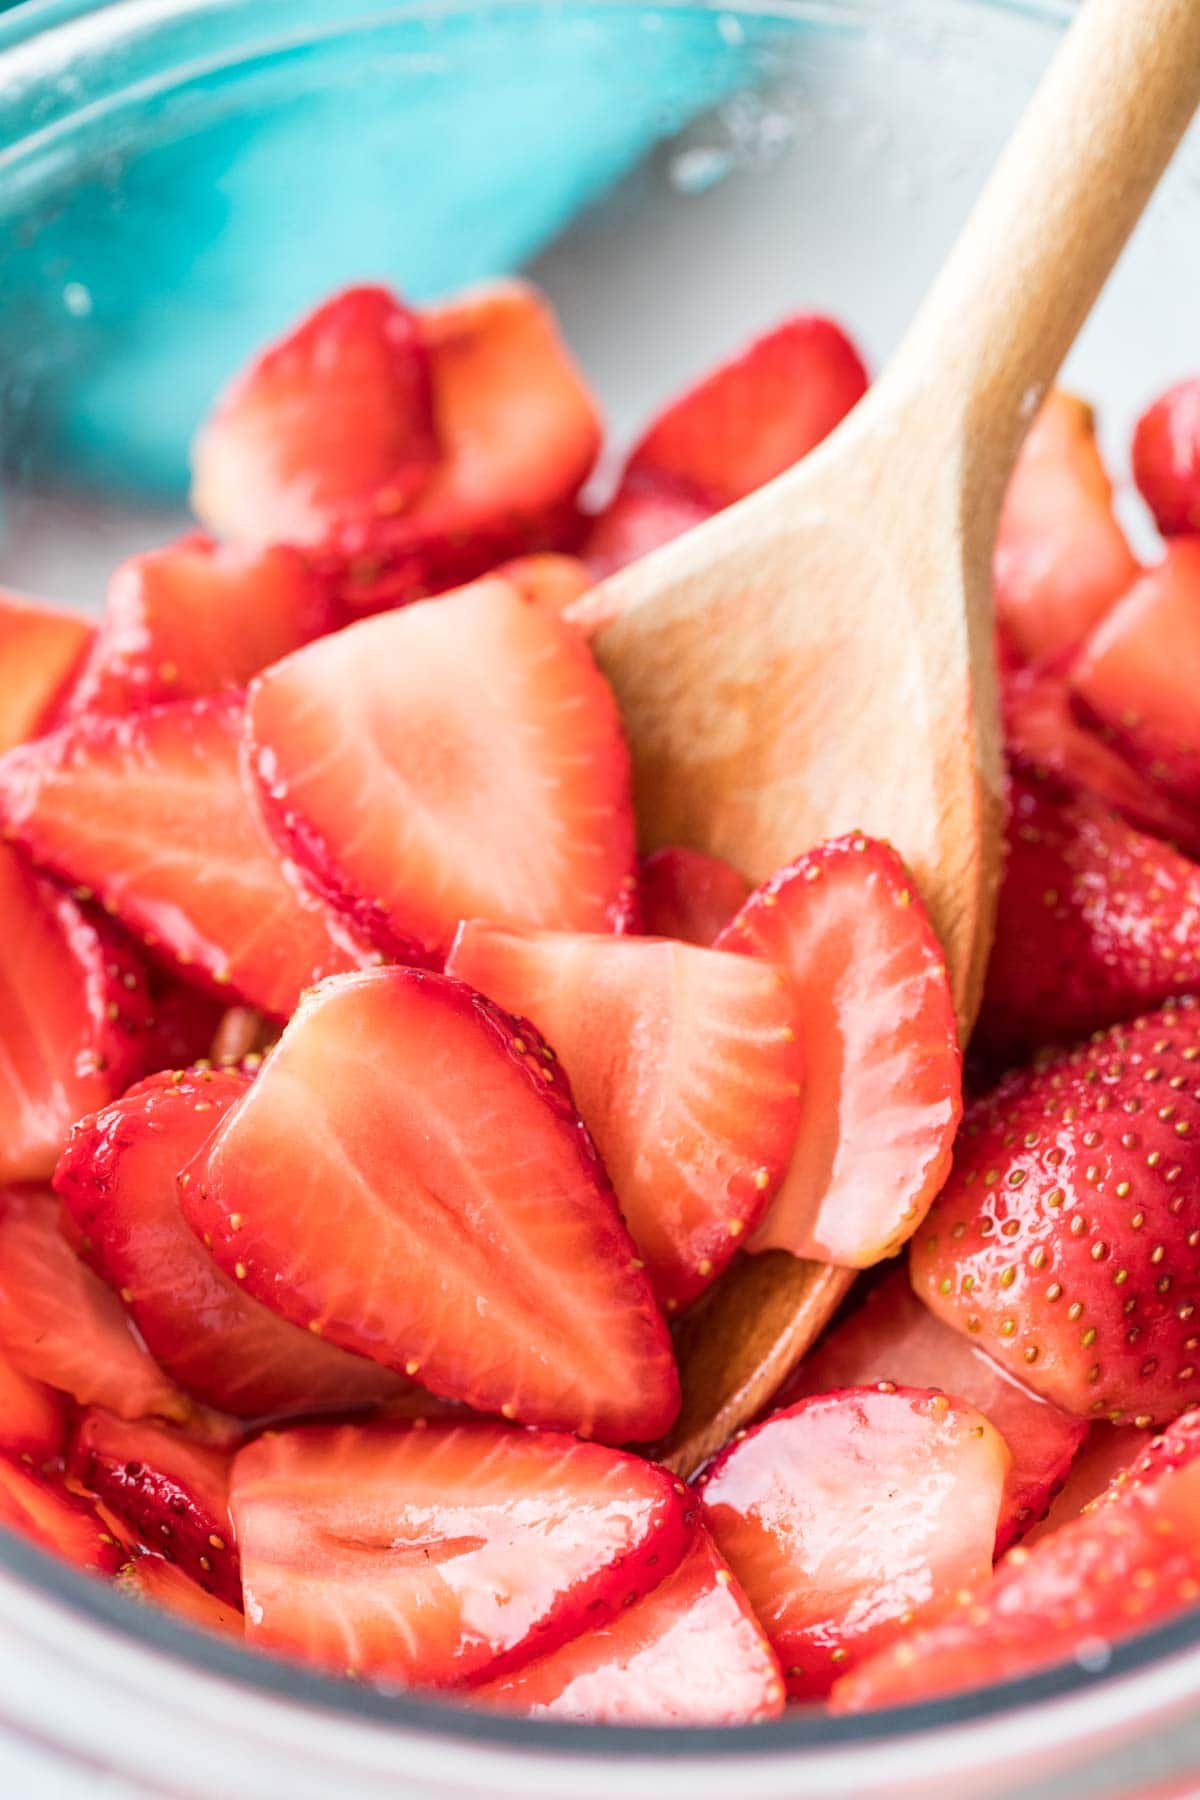 wooden spoon stirring sliced macerated strawberries in a clear bowl